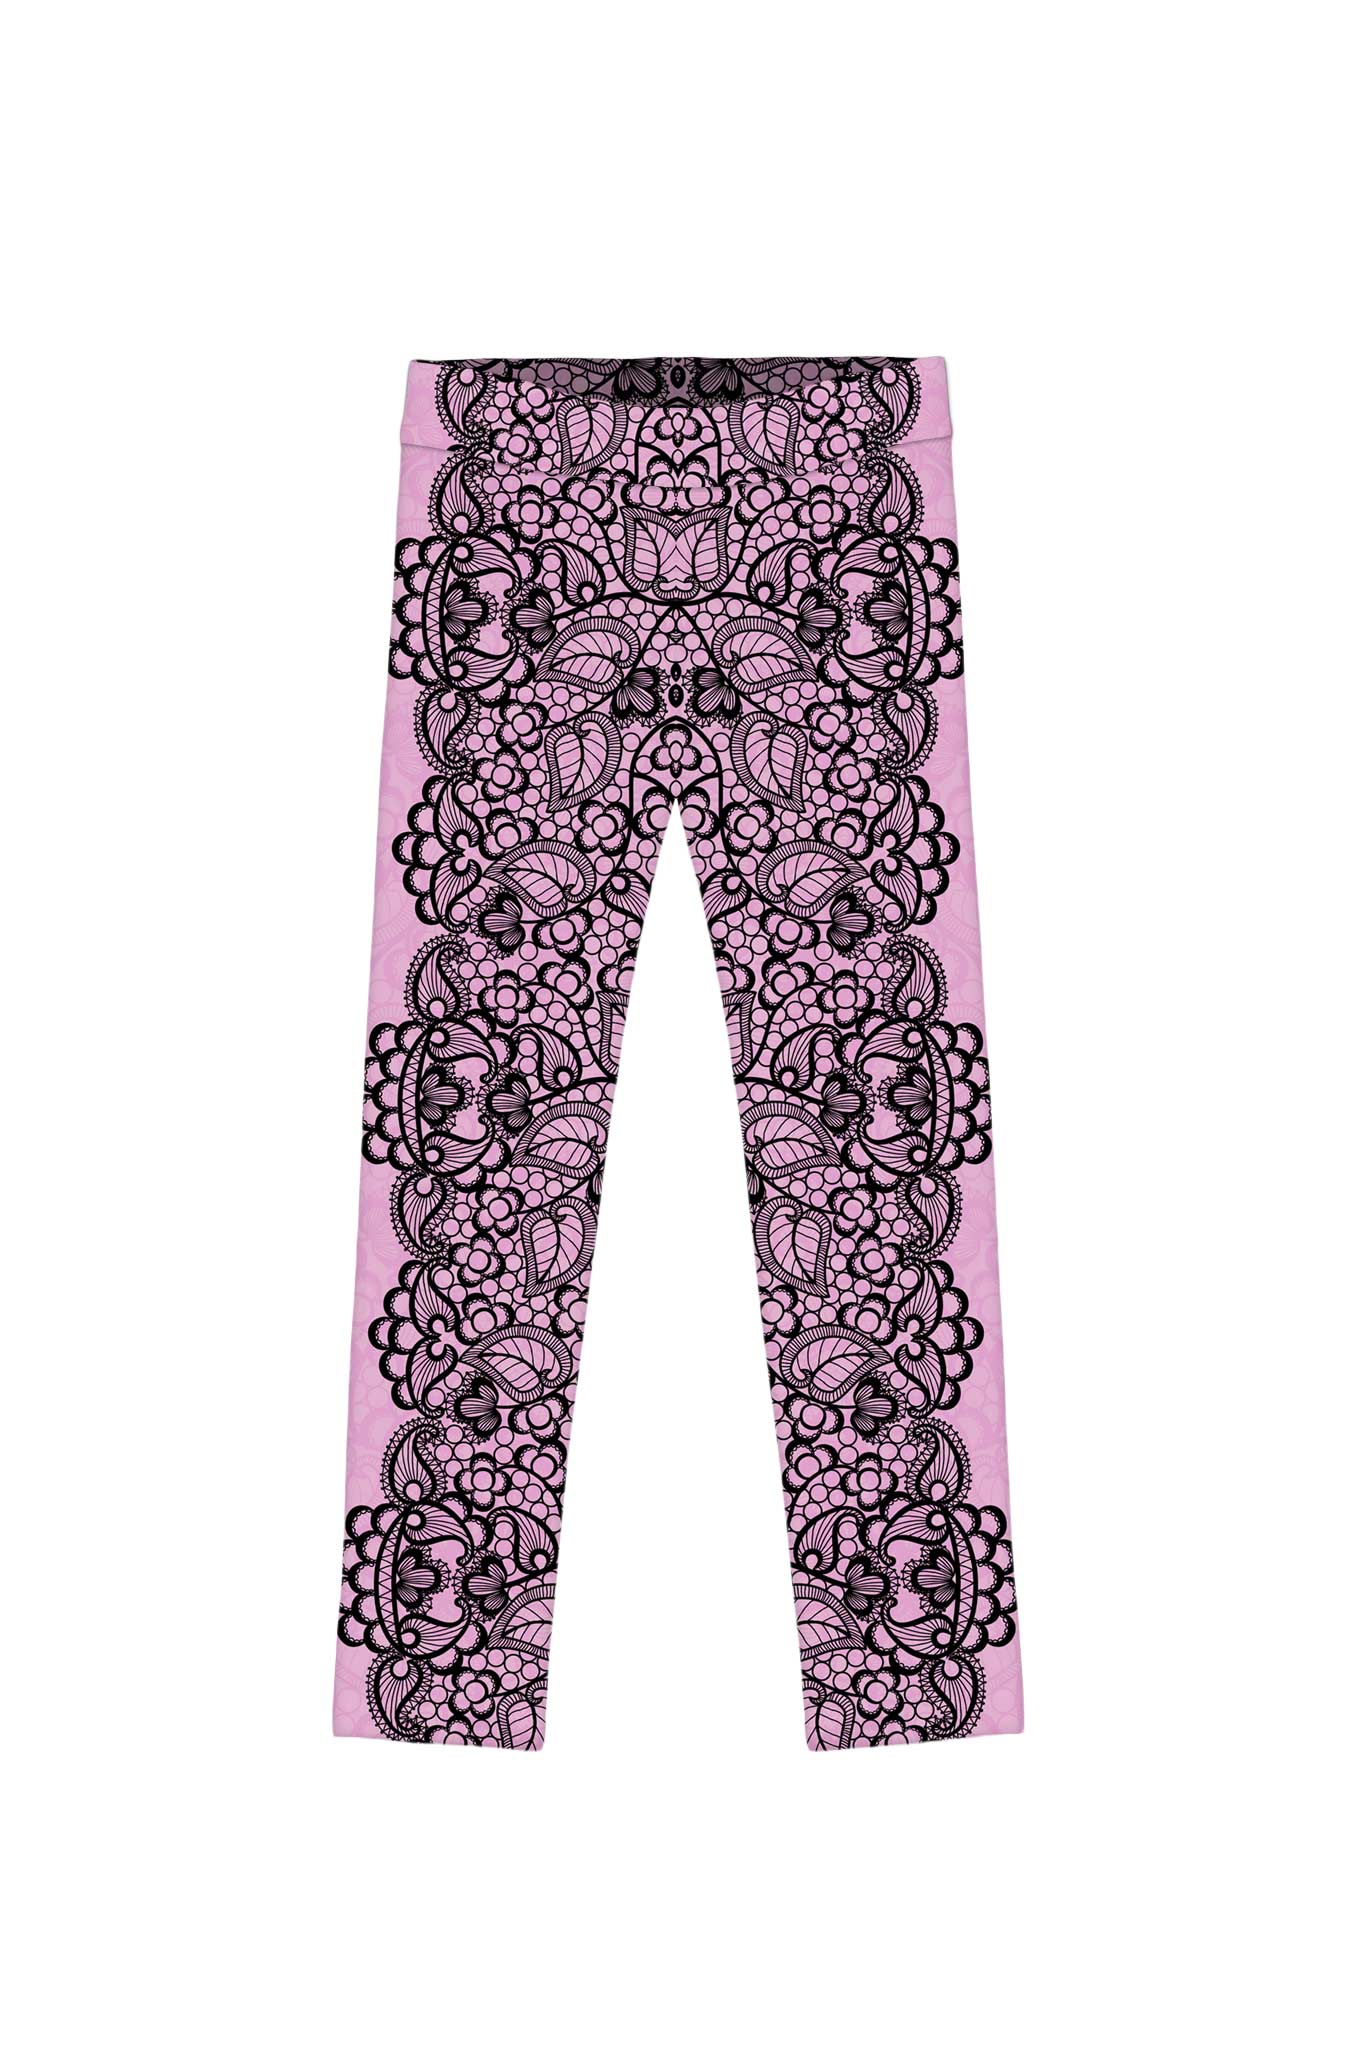 Lady Vamp Lucy Trendy Pink Lace Print Leggings - Girls - Pineapple Clothing